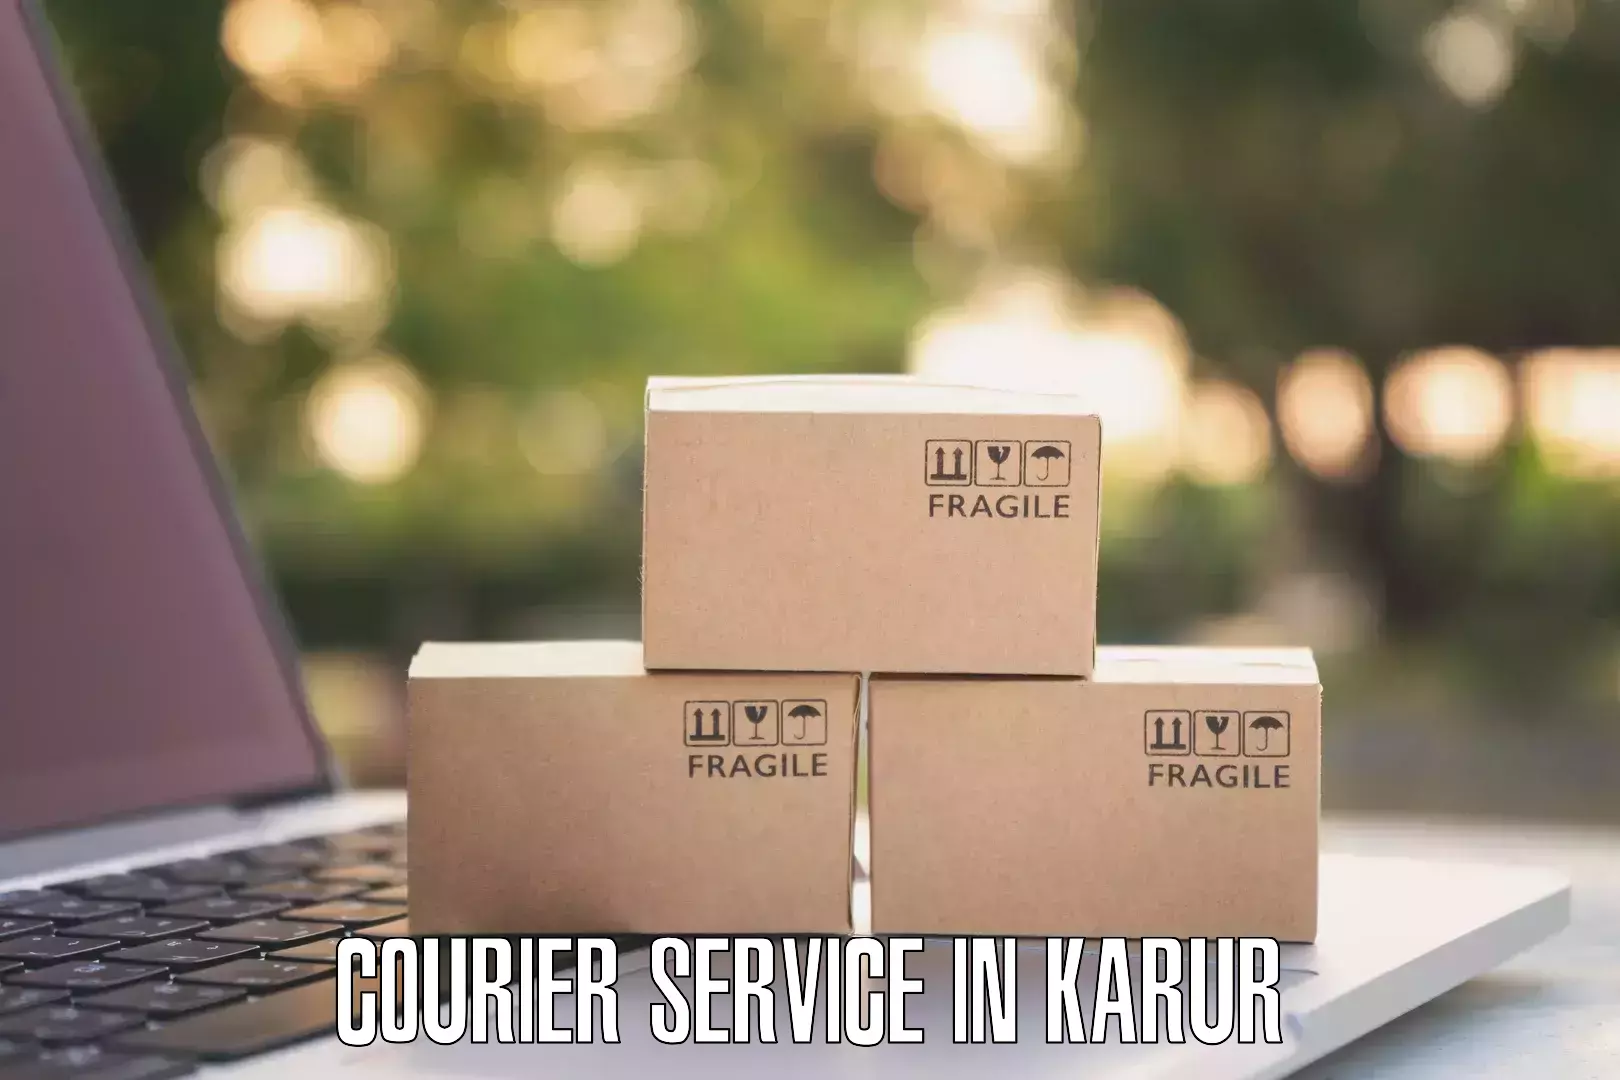 Express delivery network in Karur